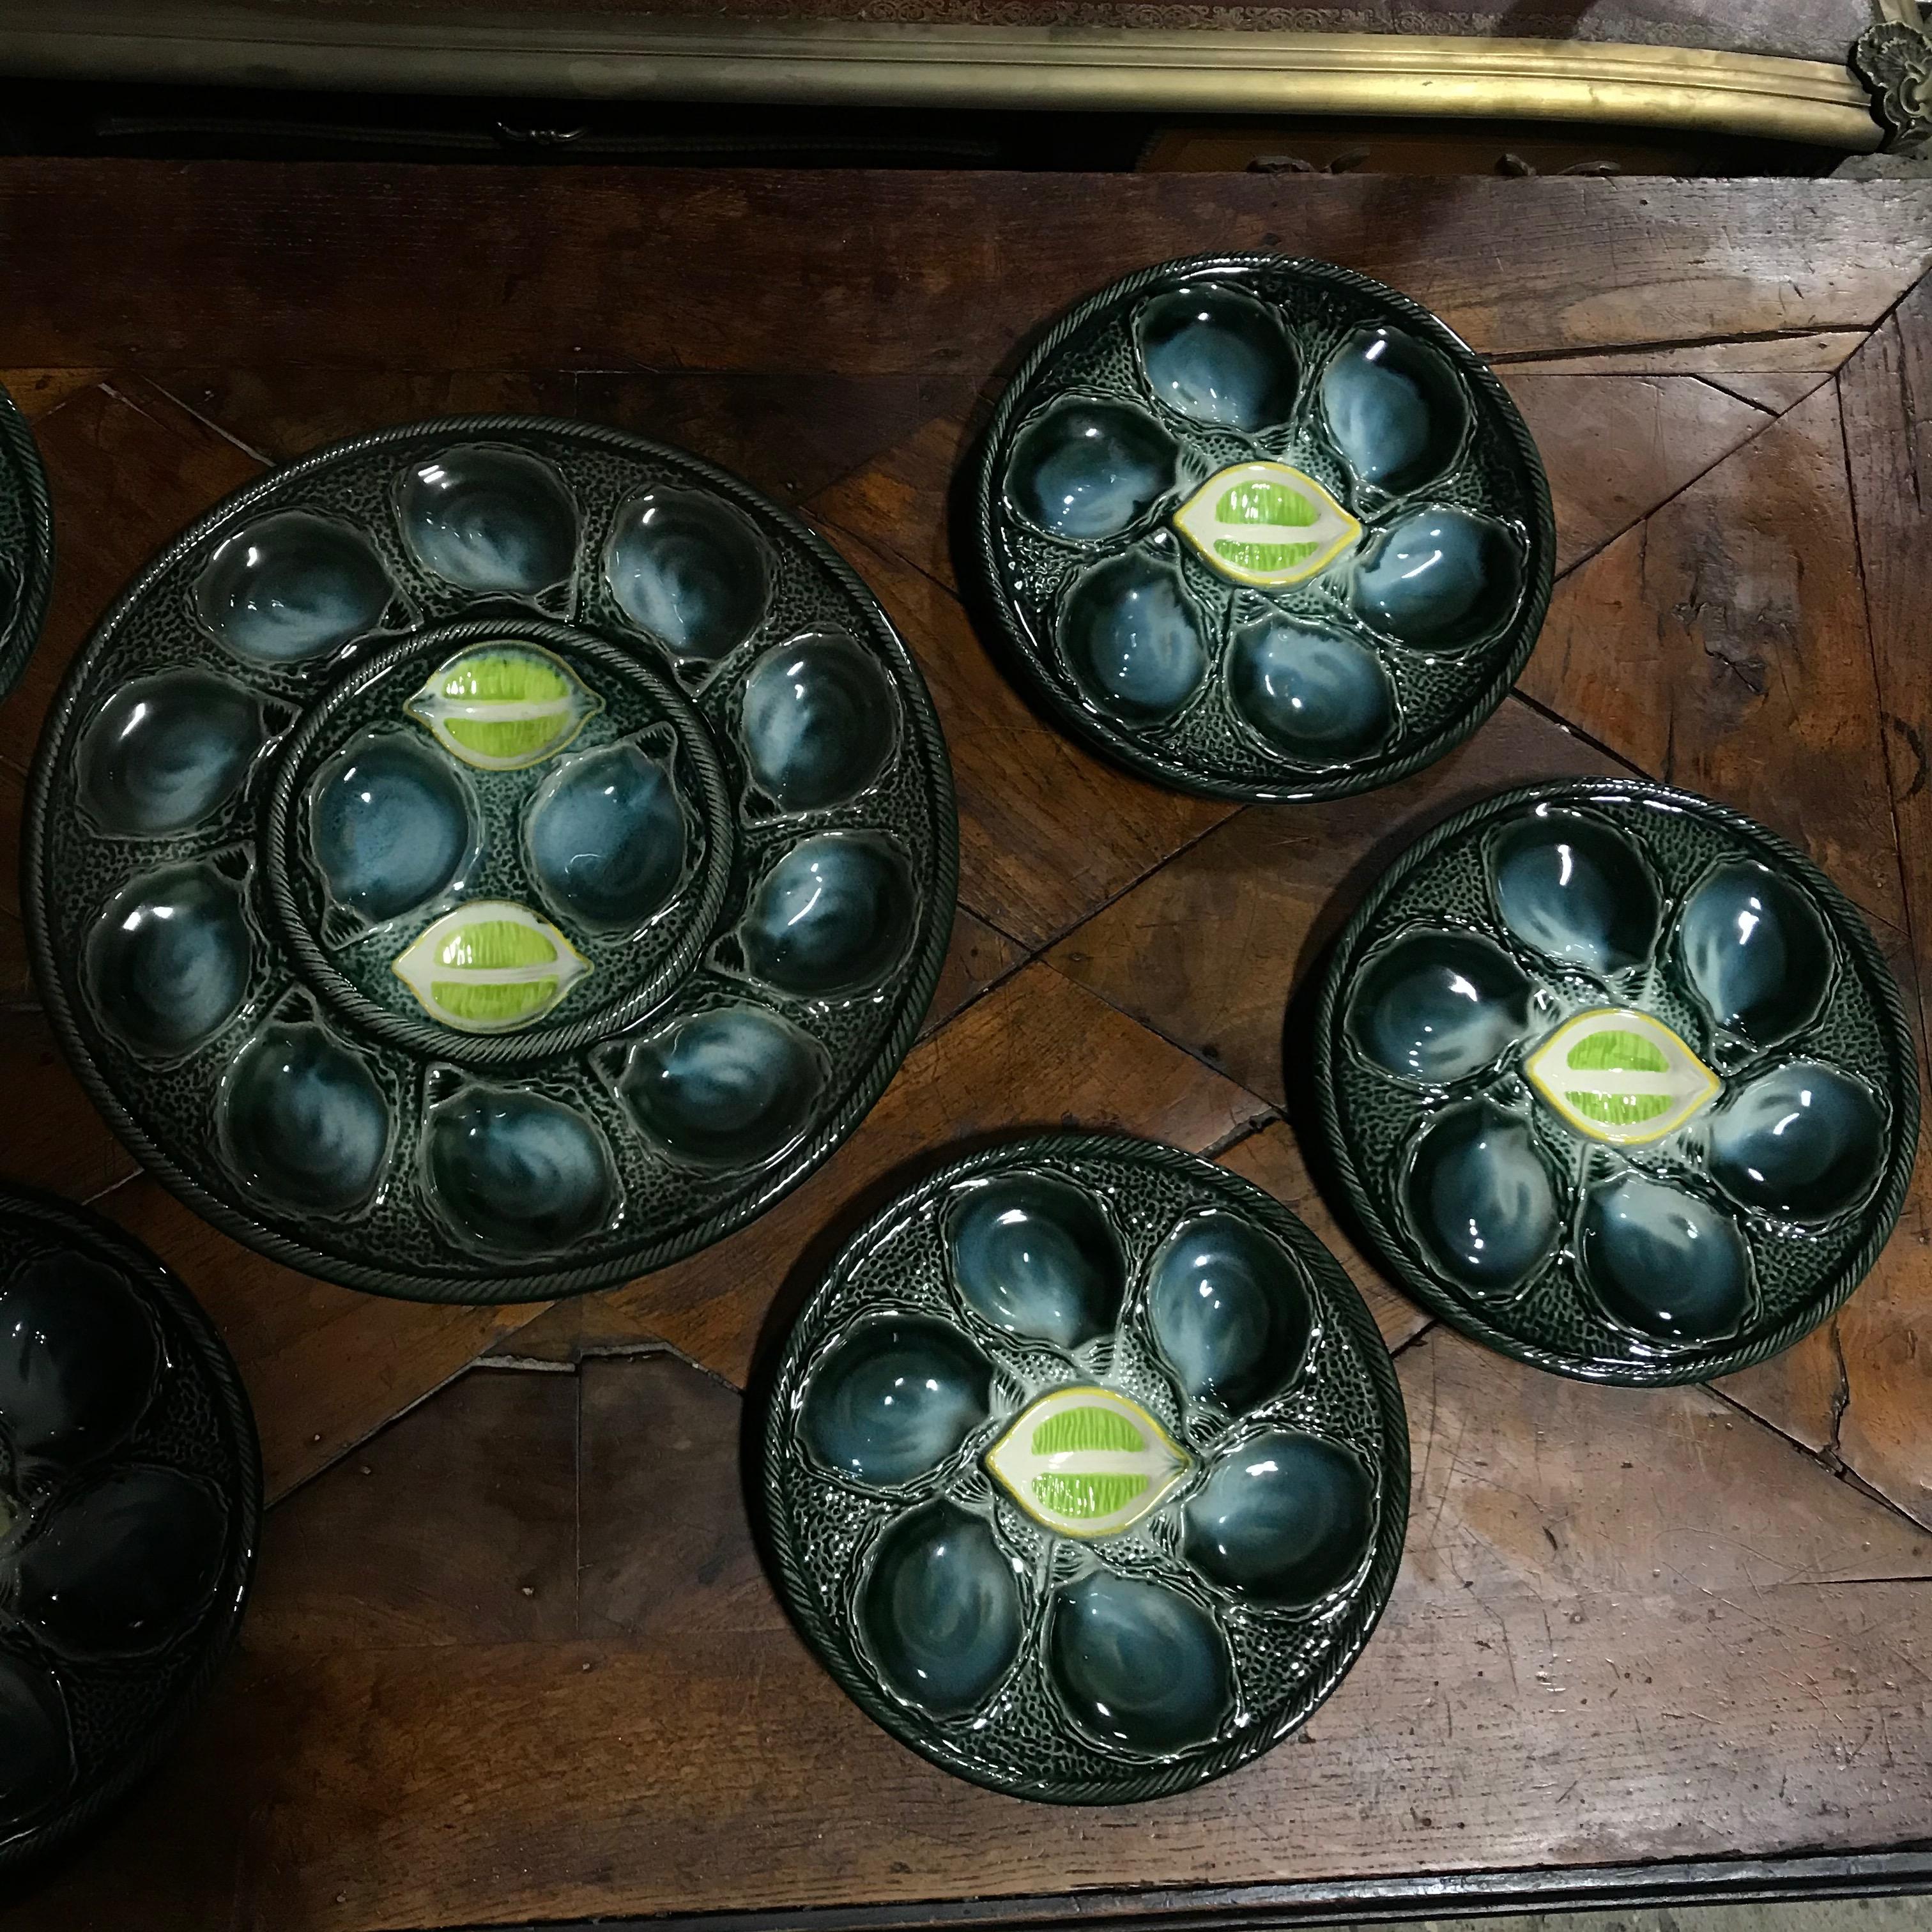 Set of six St. Clement French oyster plates with one serving platter in green painted finish with decorative lemon slots.
#3798
Measures: Diameter platter 14.5” x diameter plates 10”.